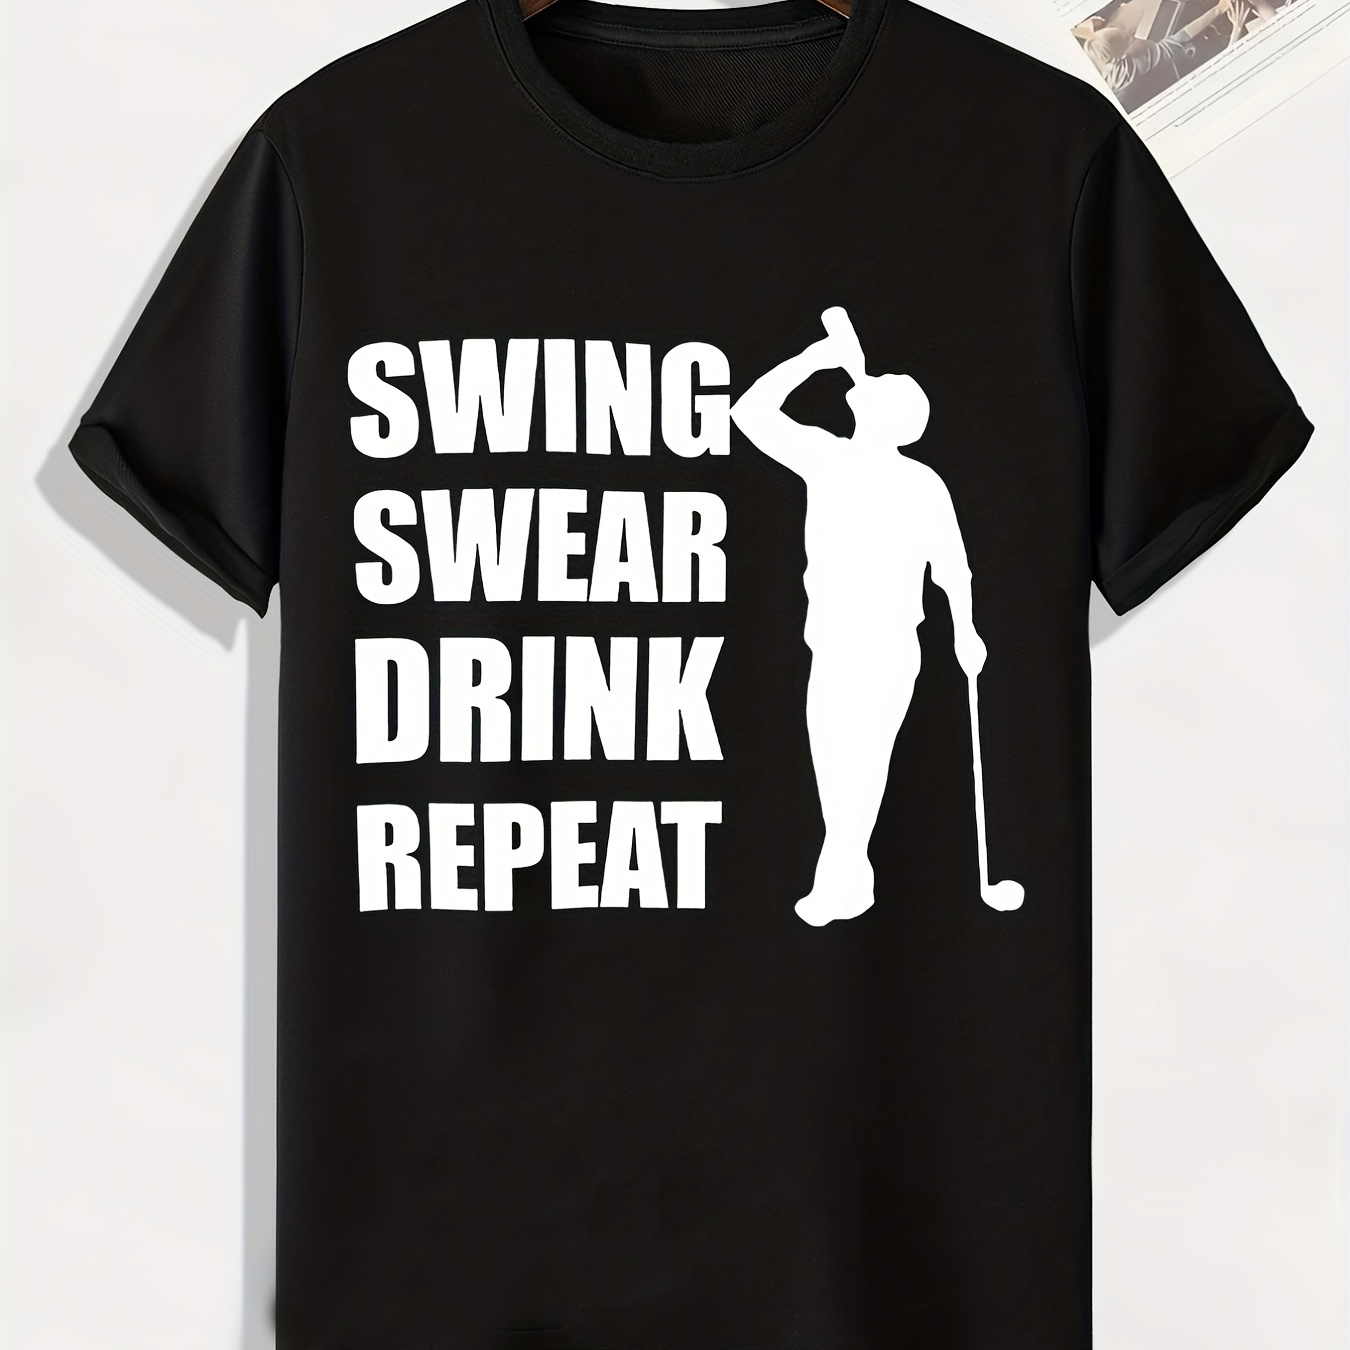 

Swing Swear Drink Repeat Letter And Golf Man Graphic Print Men's Creative Top, Casual Slightly Stretch Short Sleeve Crew Neck T-shirt, Men's Tee For Summer Outdoor